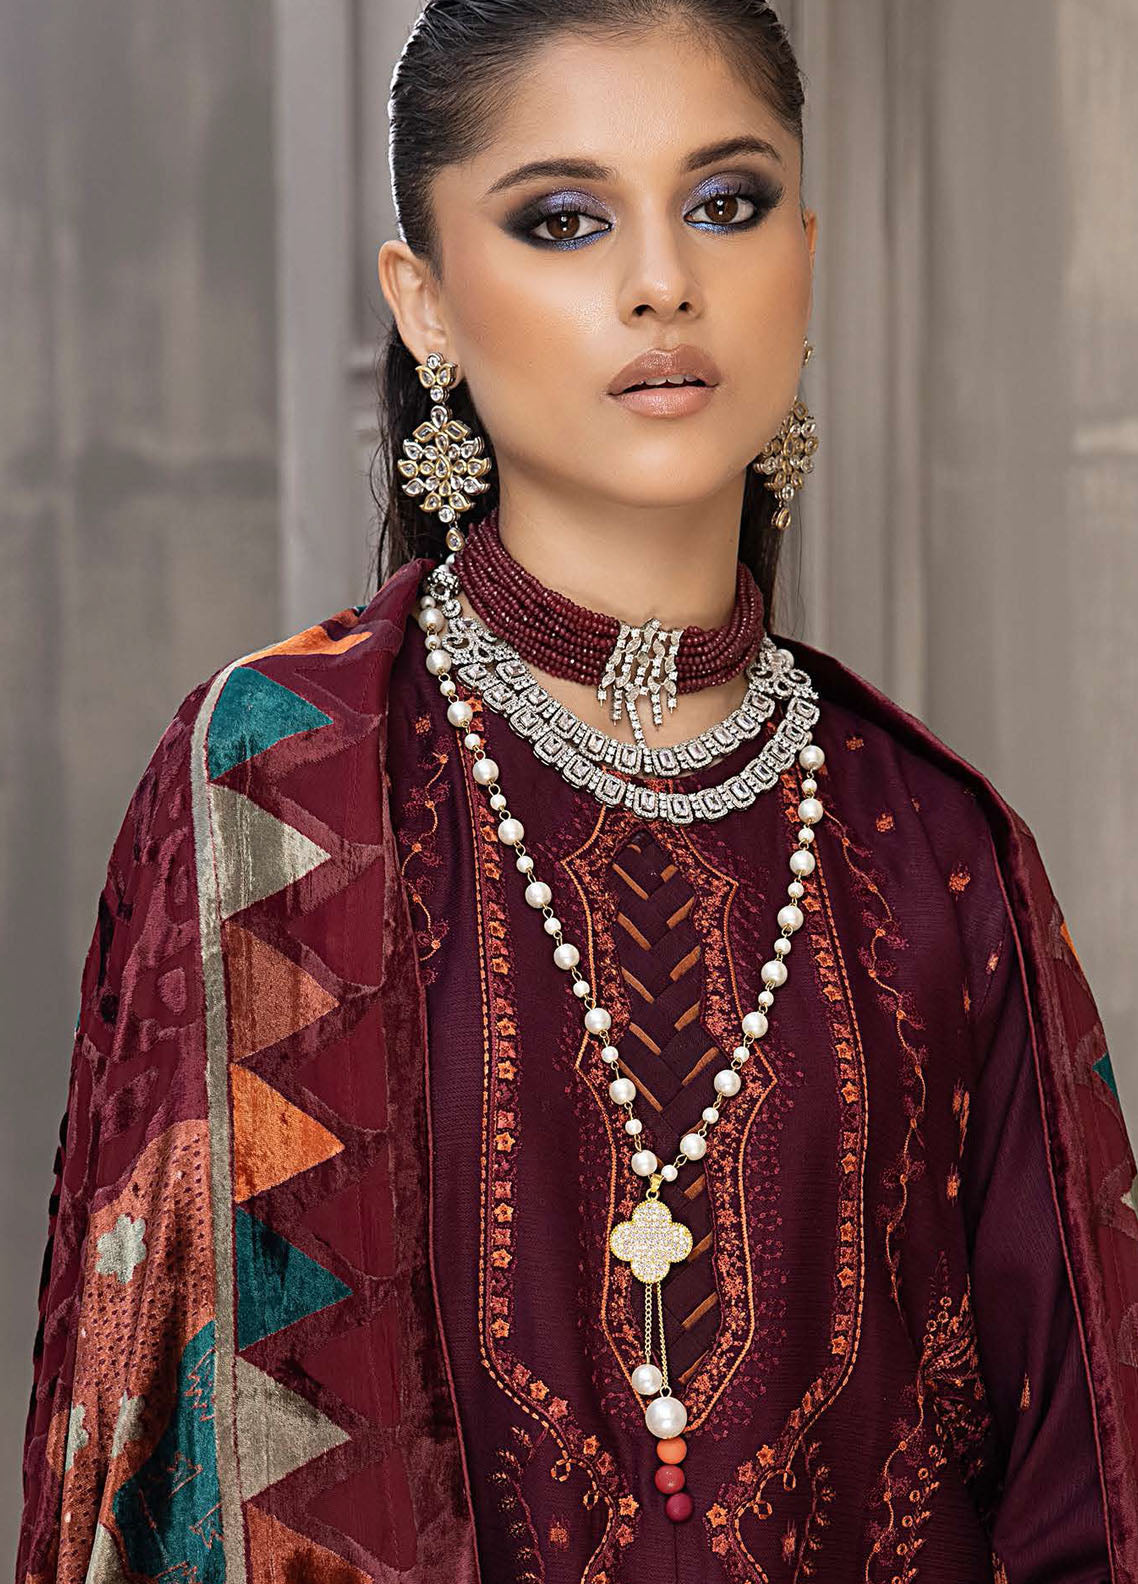 Serene By Bin Ilyas Fall Winter Embroidered Collection 2023 503-B